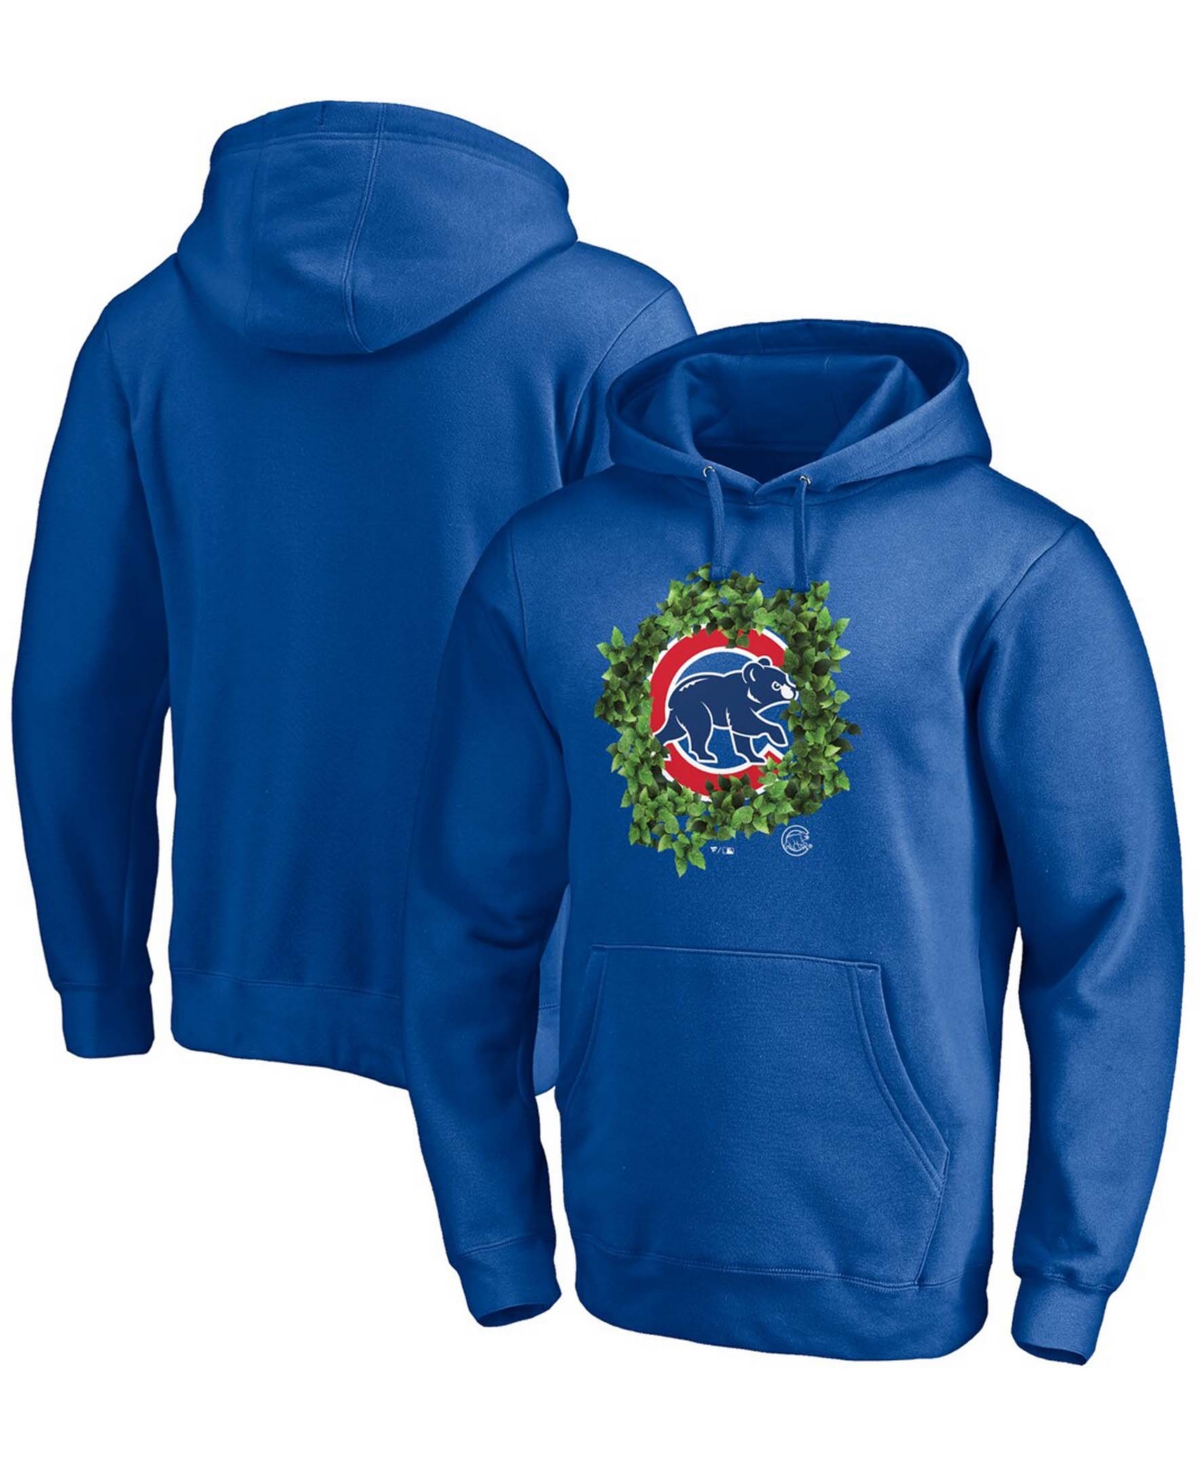 FANATICS MEN'S ROYAL CHICAGO CUBS HOMETOWN PULLOVER HOODIE